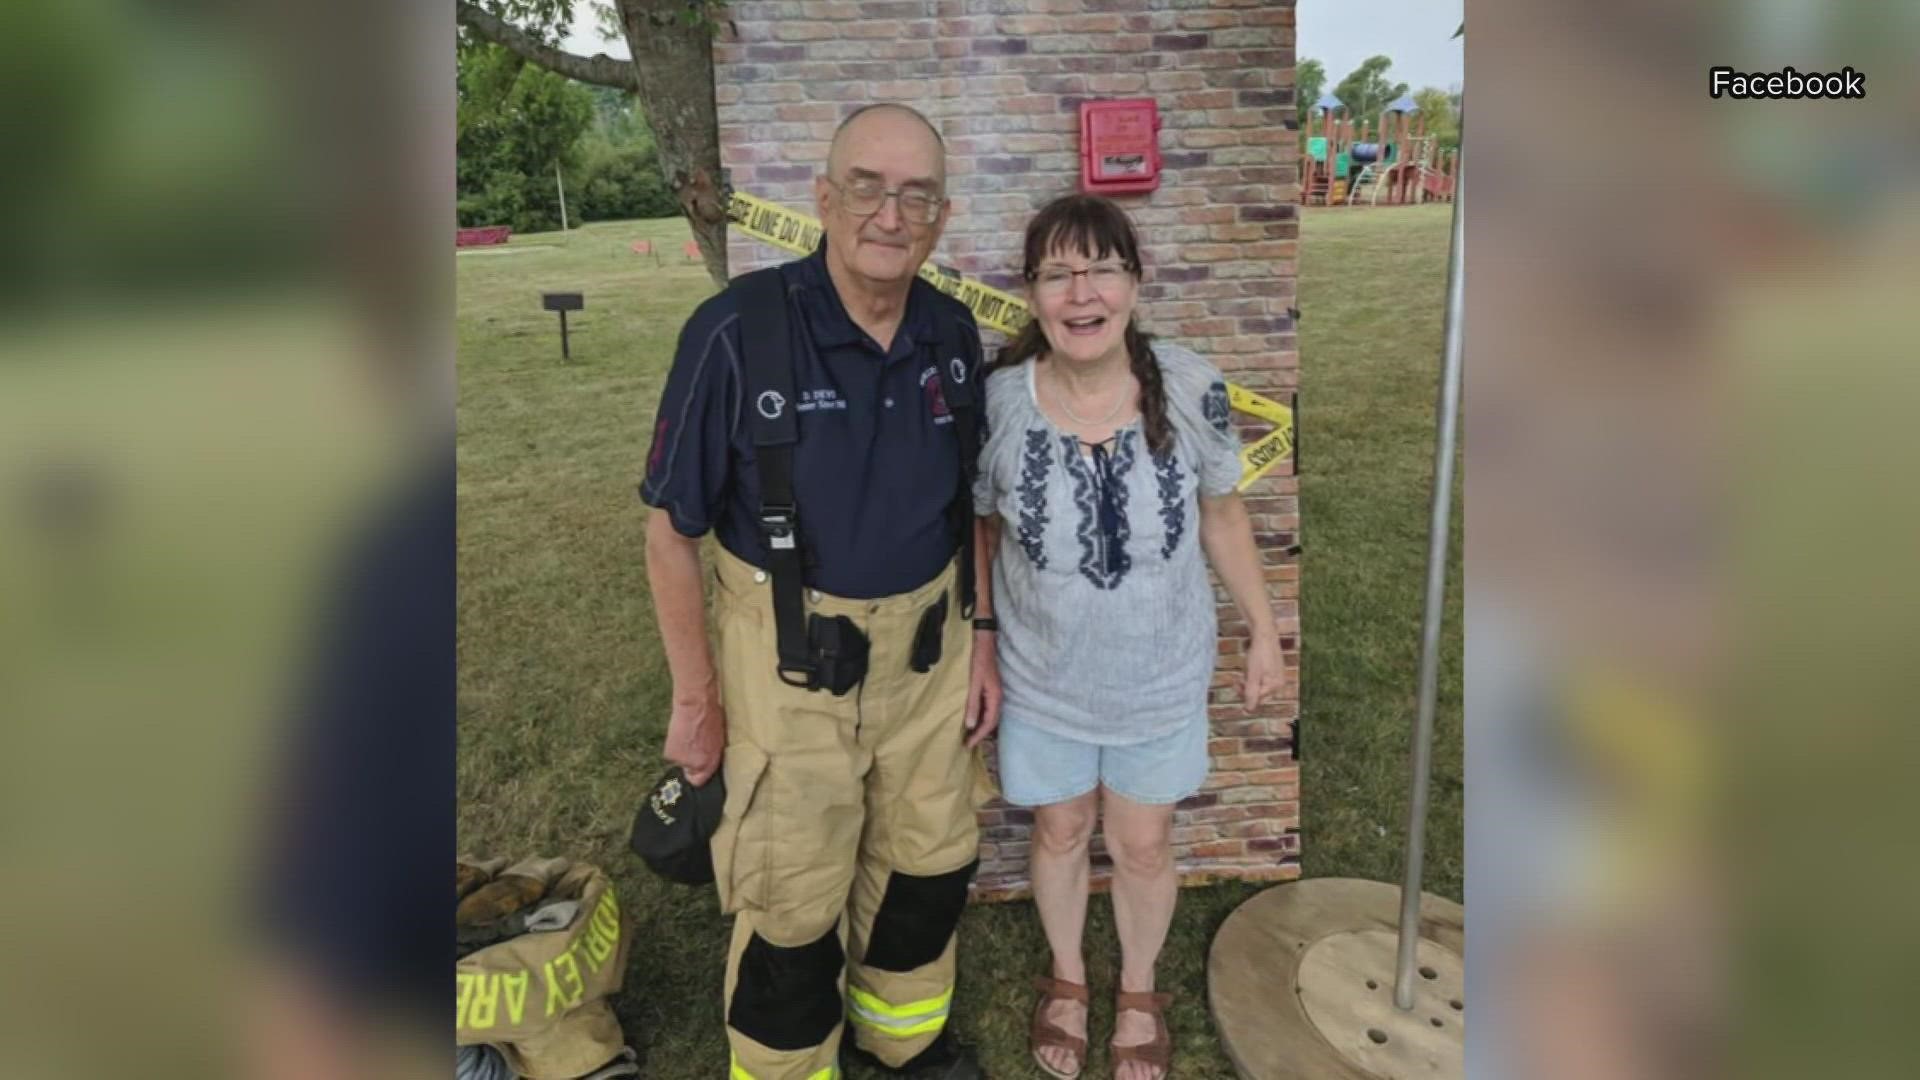 Dan Deyo served the Morley Area Fire Department for more than 40 years, and he worked for Mecosta County EMS for a number of years.